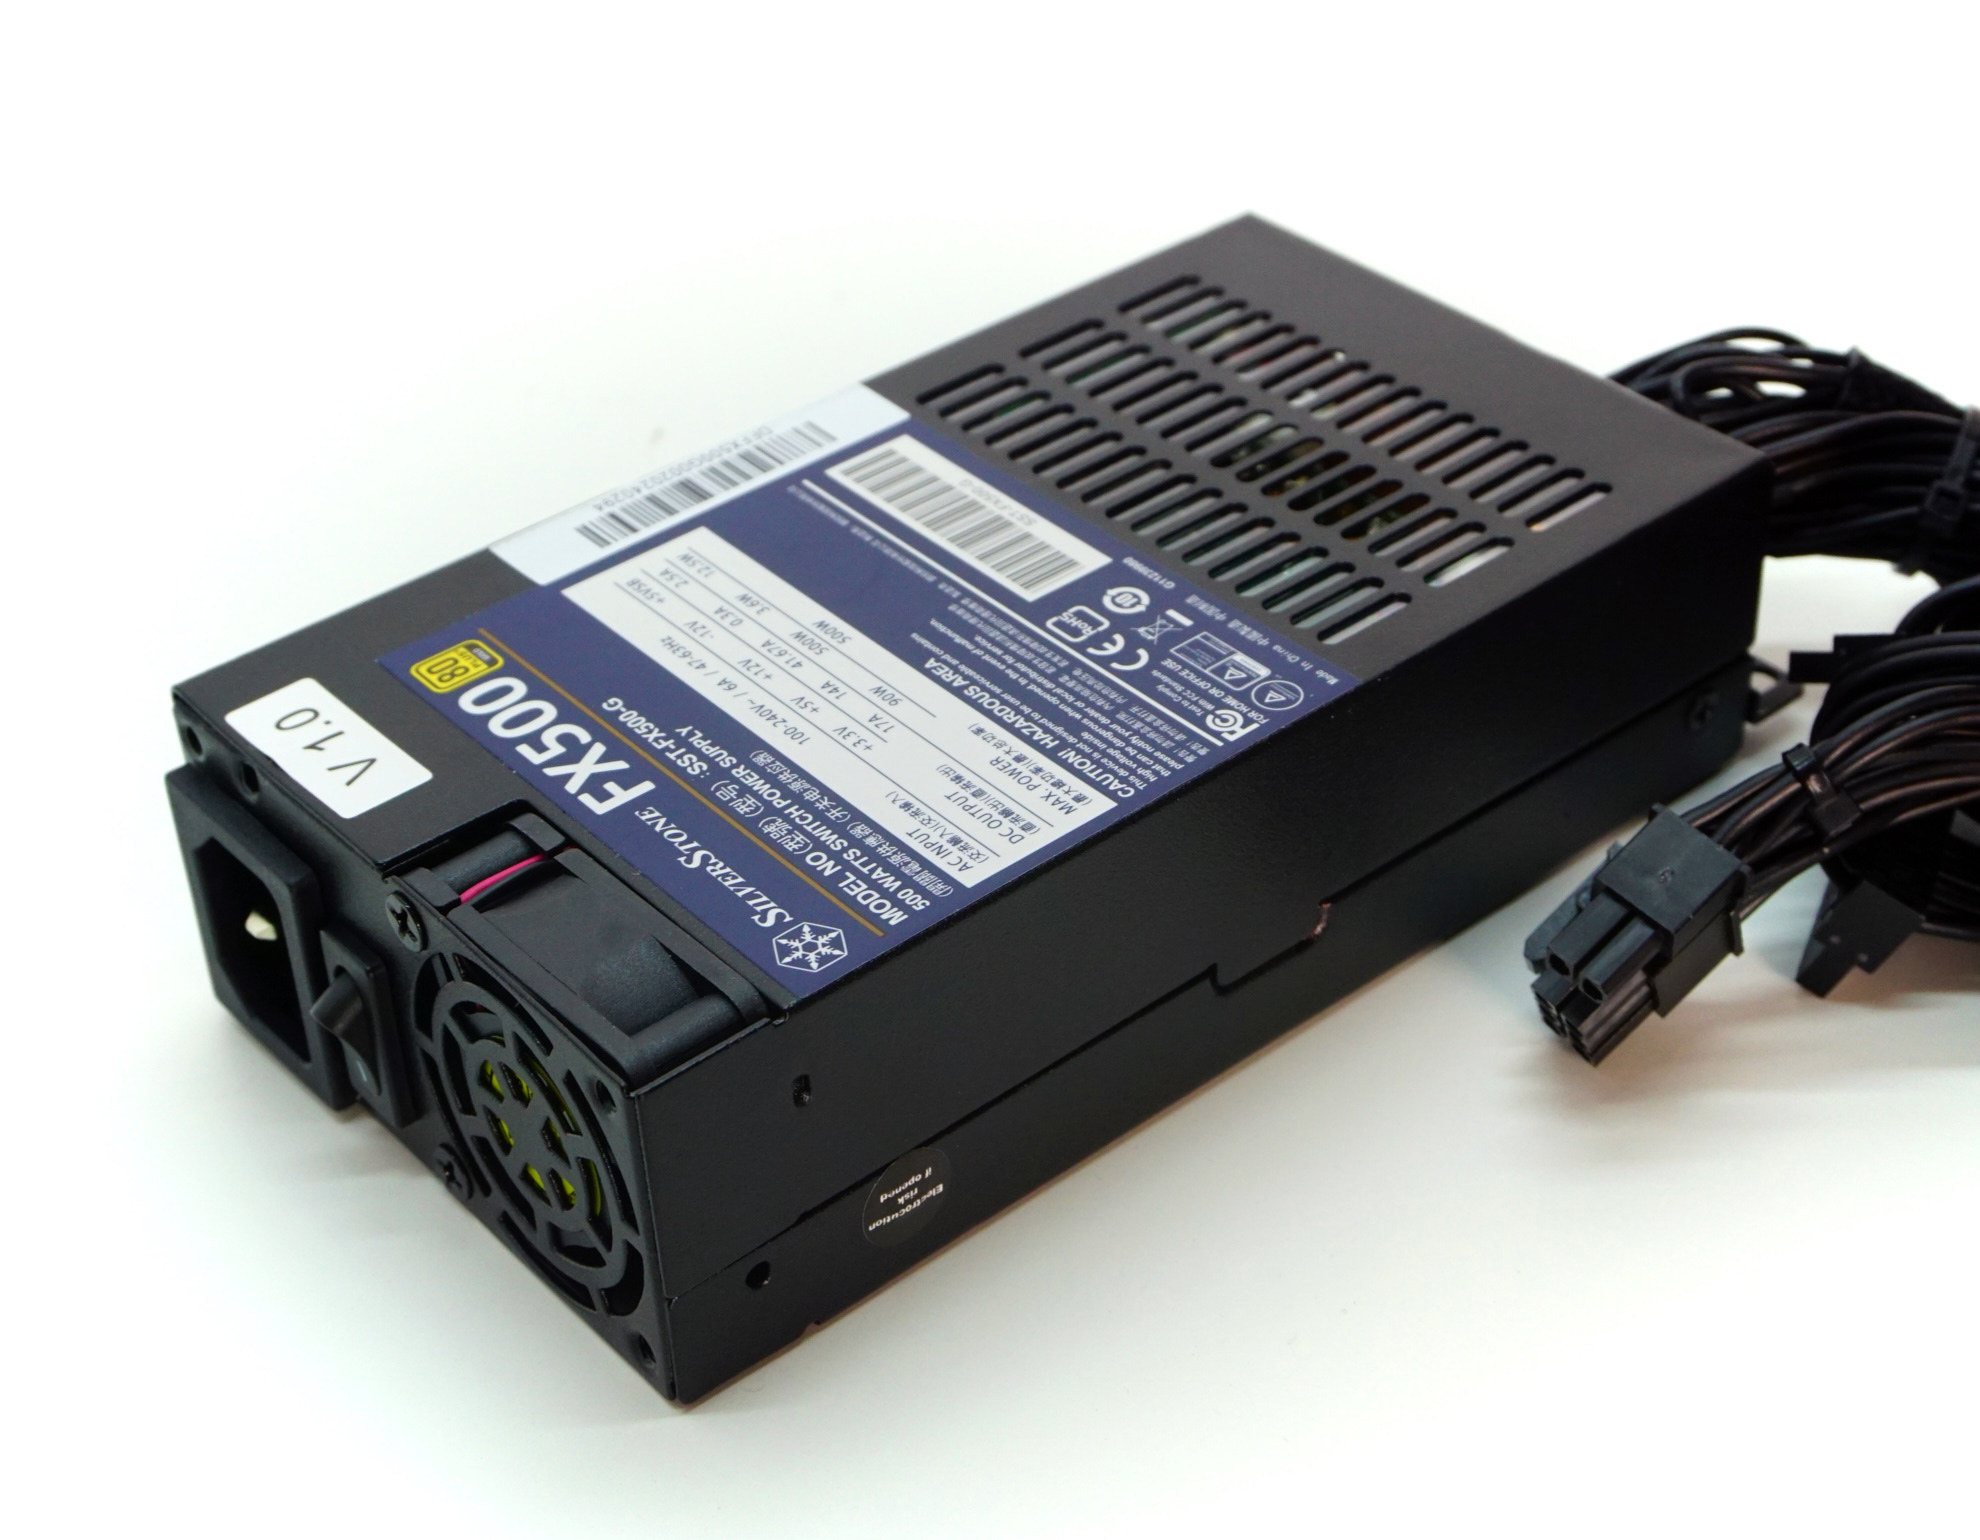 Final Words & Conclusion - The SilverStone Flex-ATX 500W PSU Review: Small Power Supply With a Bark